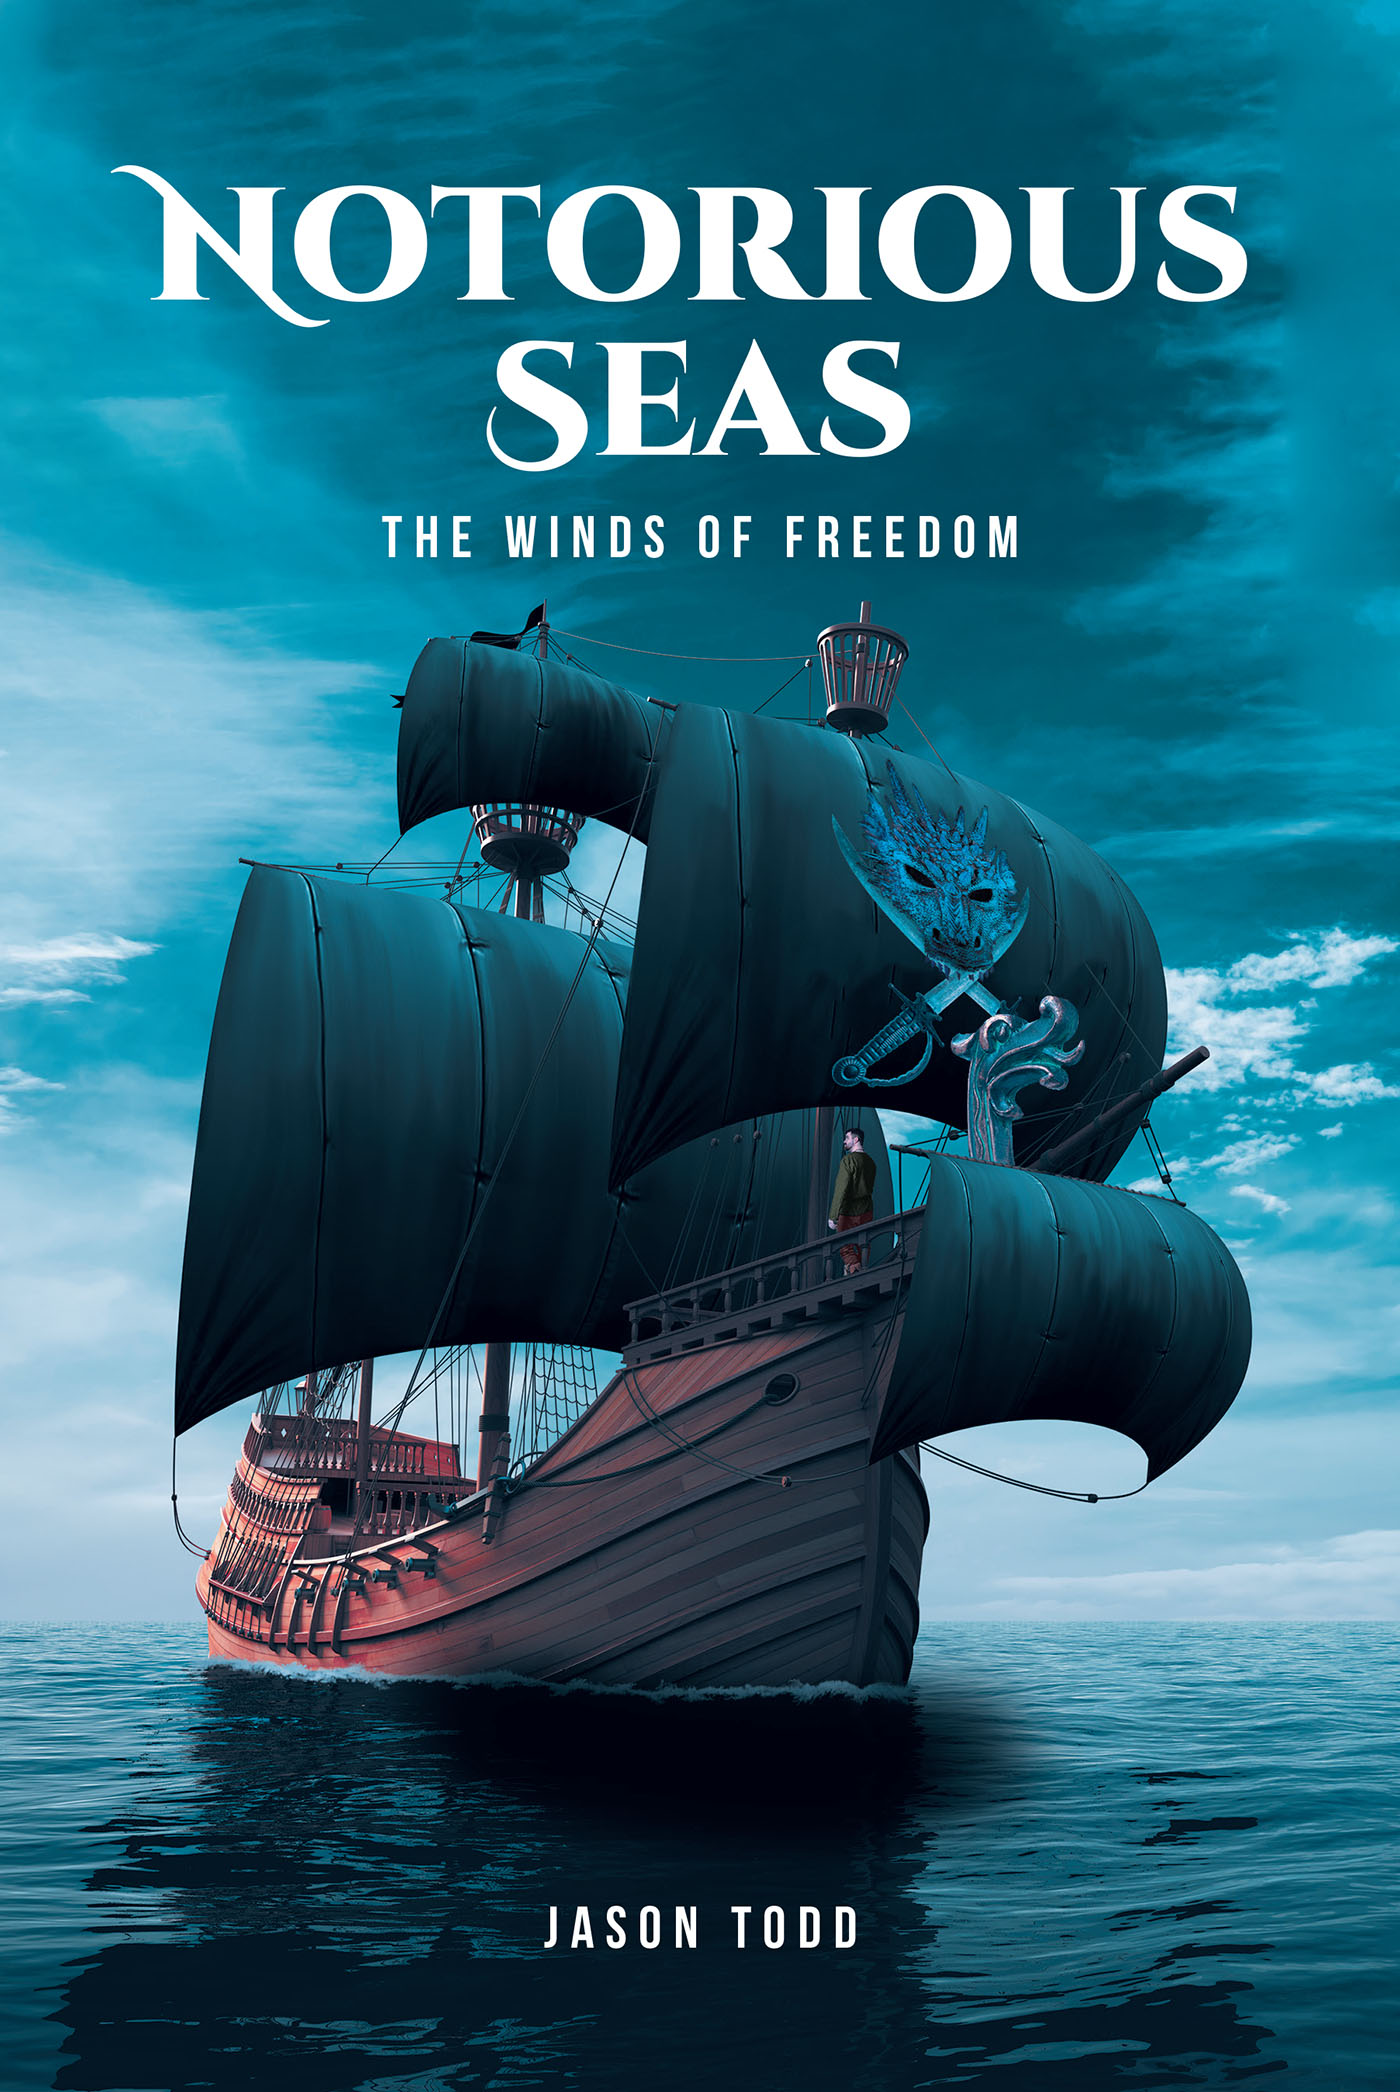 Jason Todd’s New Book, “Notorious Seas: The Winds of Freedom,” is a Thrilling and Swashbuckling Novel About One Man’s Journey to Take Control of His Own Narrative